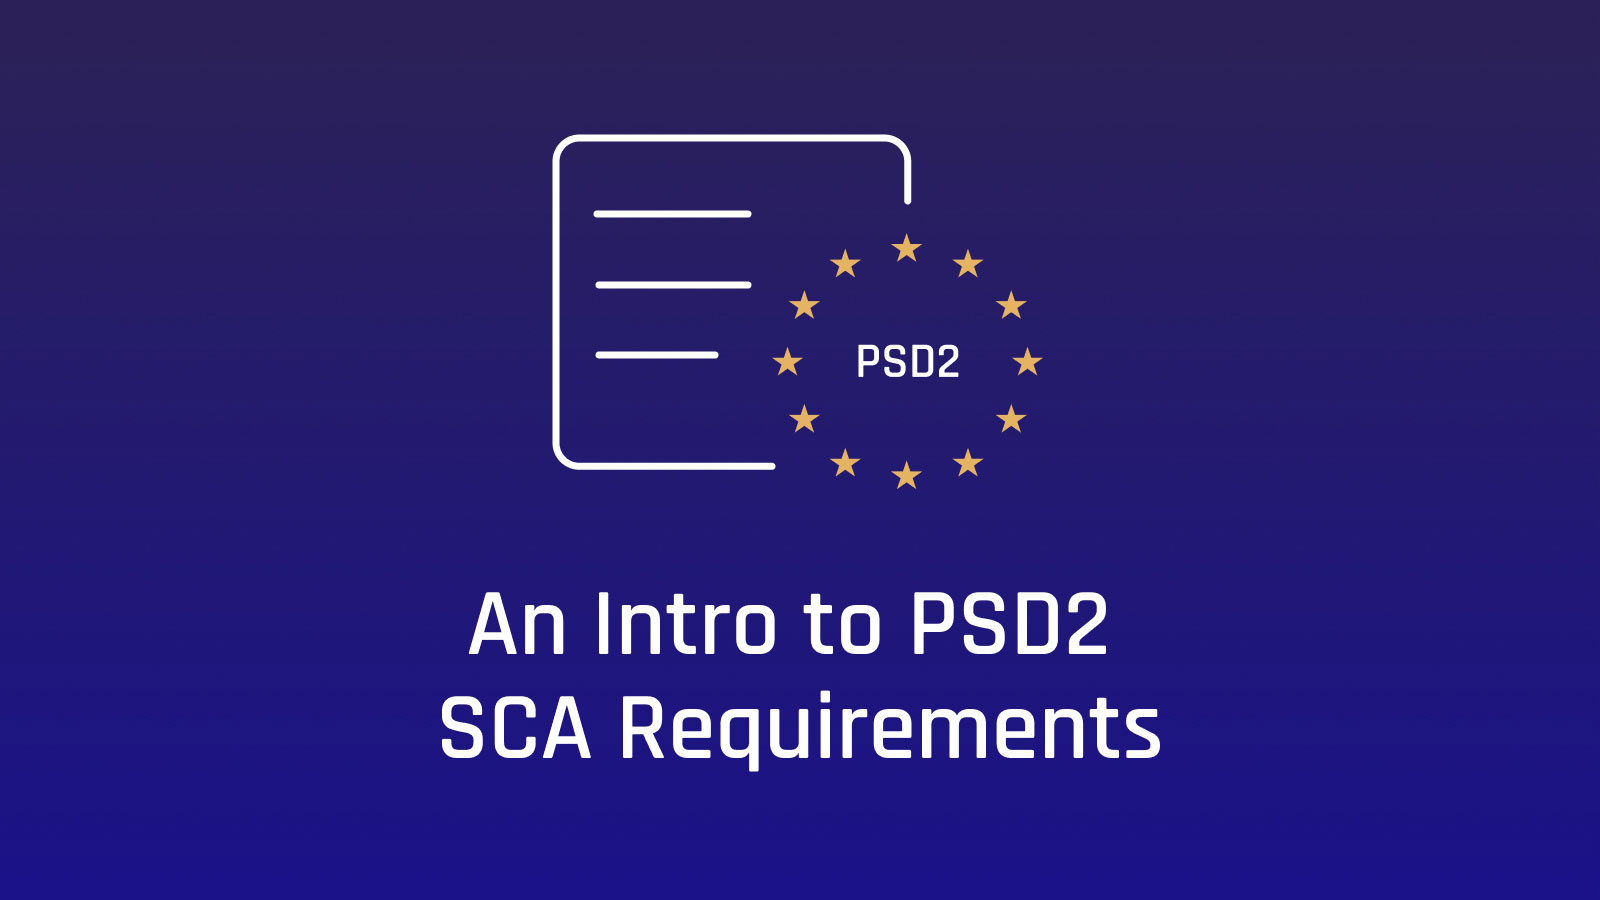 An Intro to PSD2 SCA Requirements